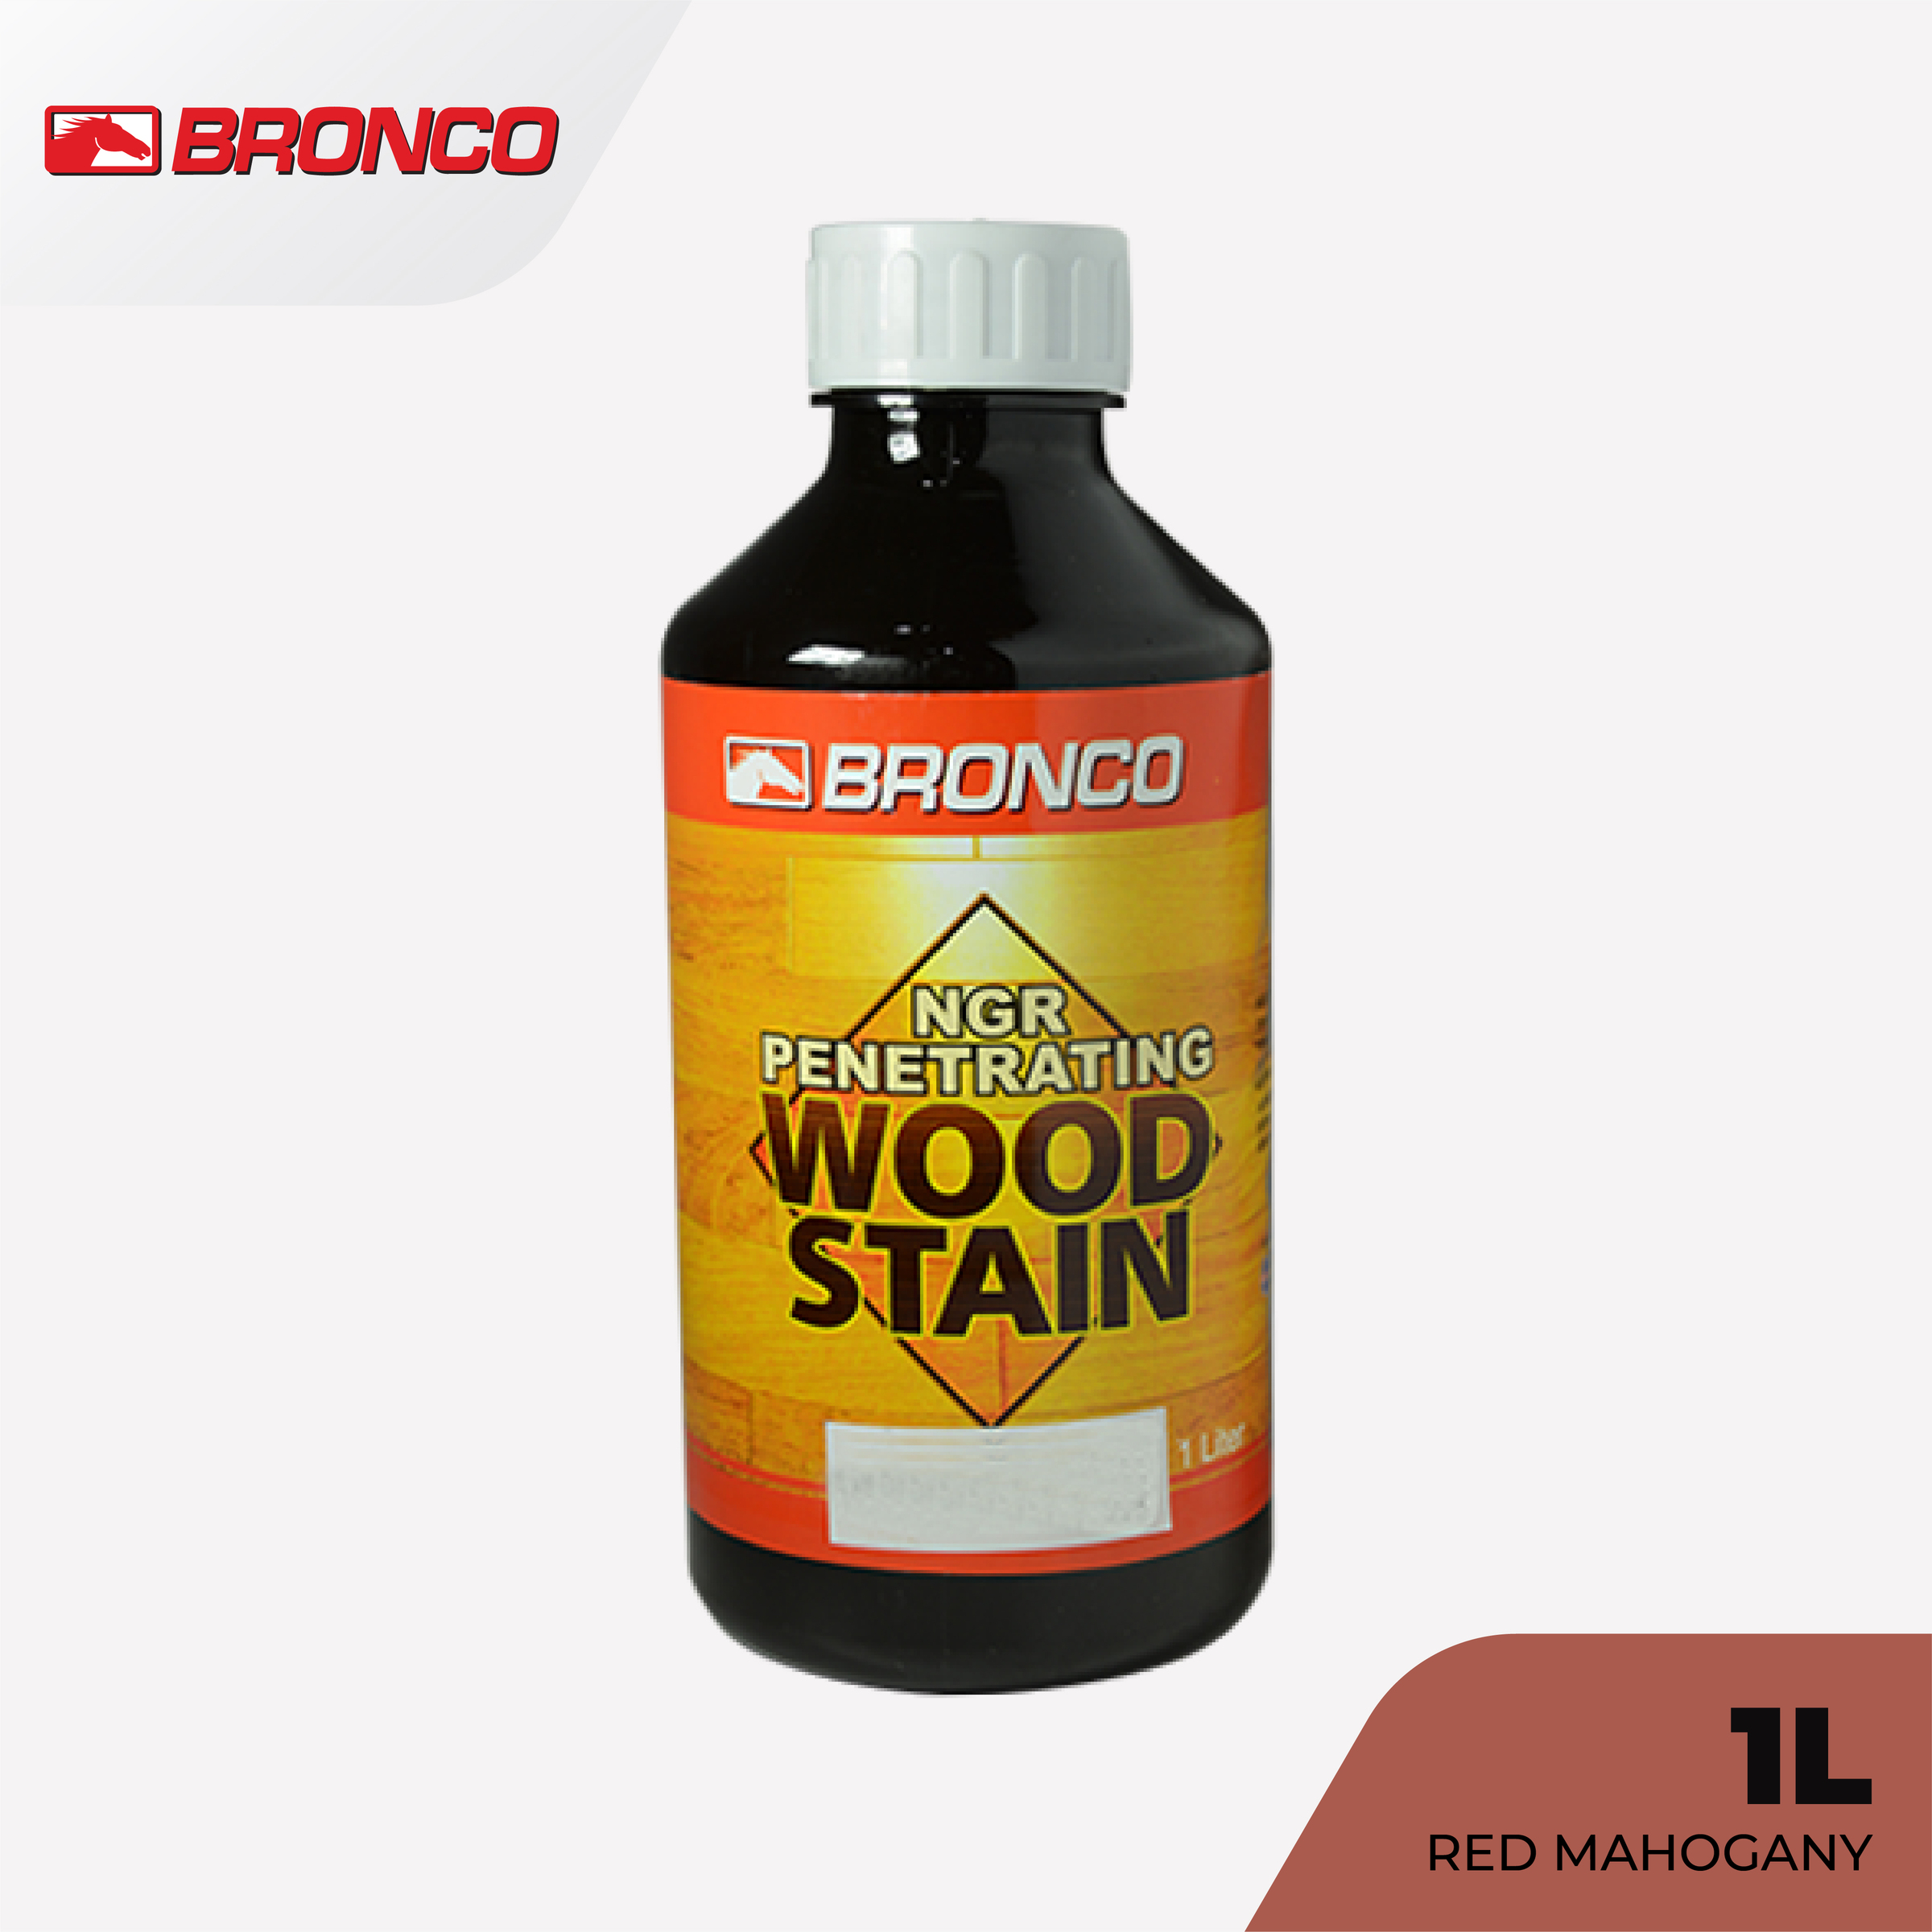 Bronco NGR Penetrating Wood Stain Red Mahogany - 1L